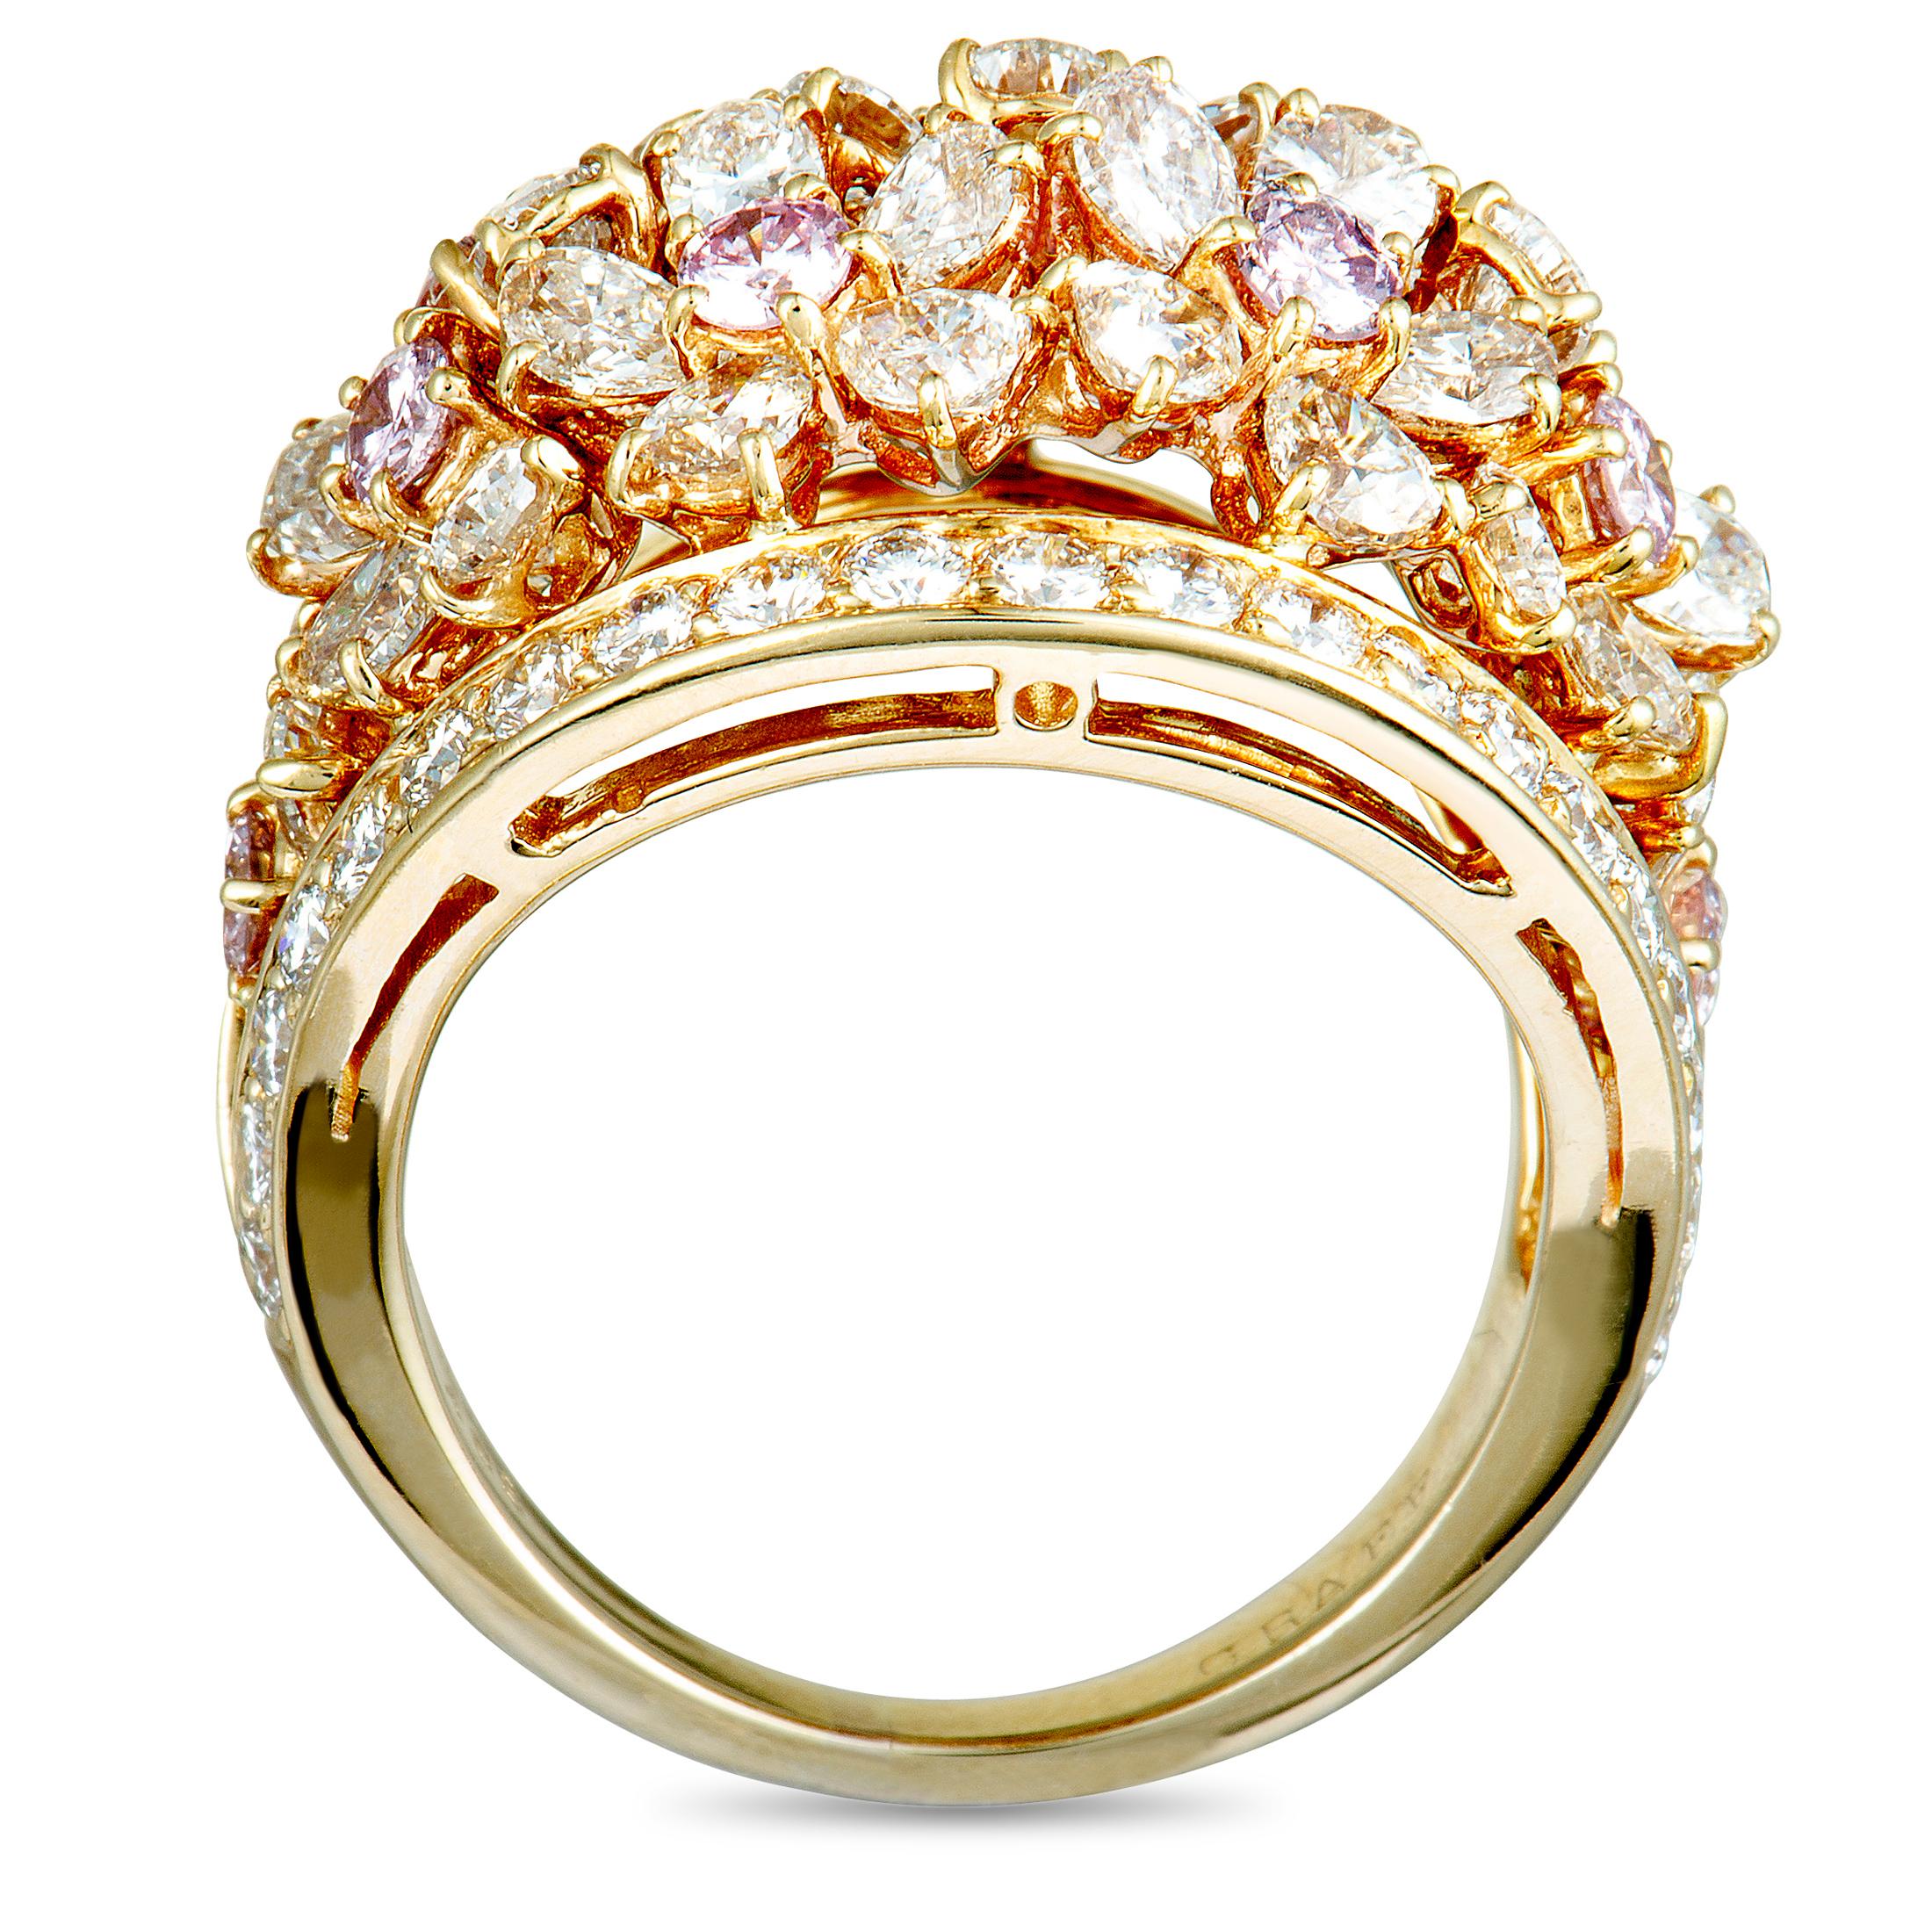 A stunningly resplendent fusion of enticing extravagance and sublime femininity, this fabulous ring presented by Graff is expertly crafted from luxurious 18K yellow gold and lavishly decorated with lustrous pink and white diamonds that weigh 4.85